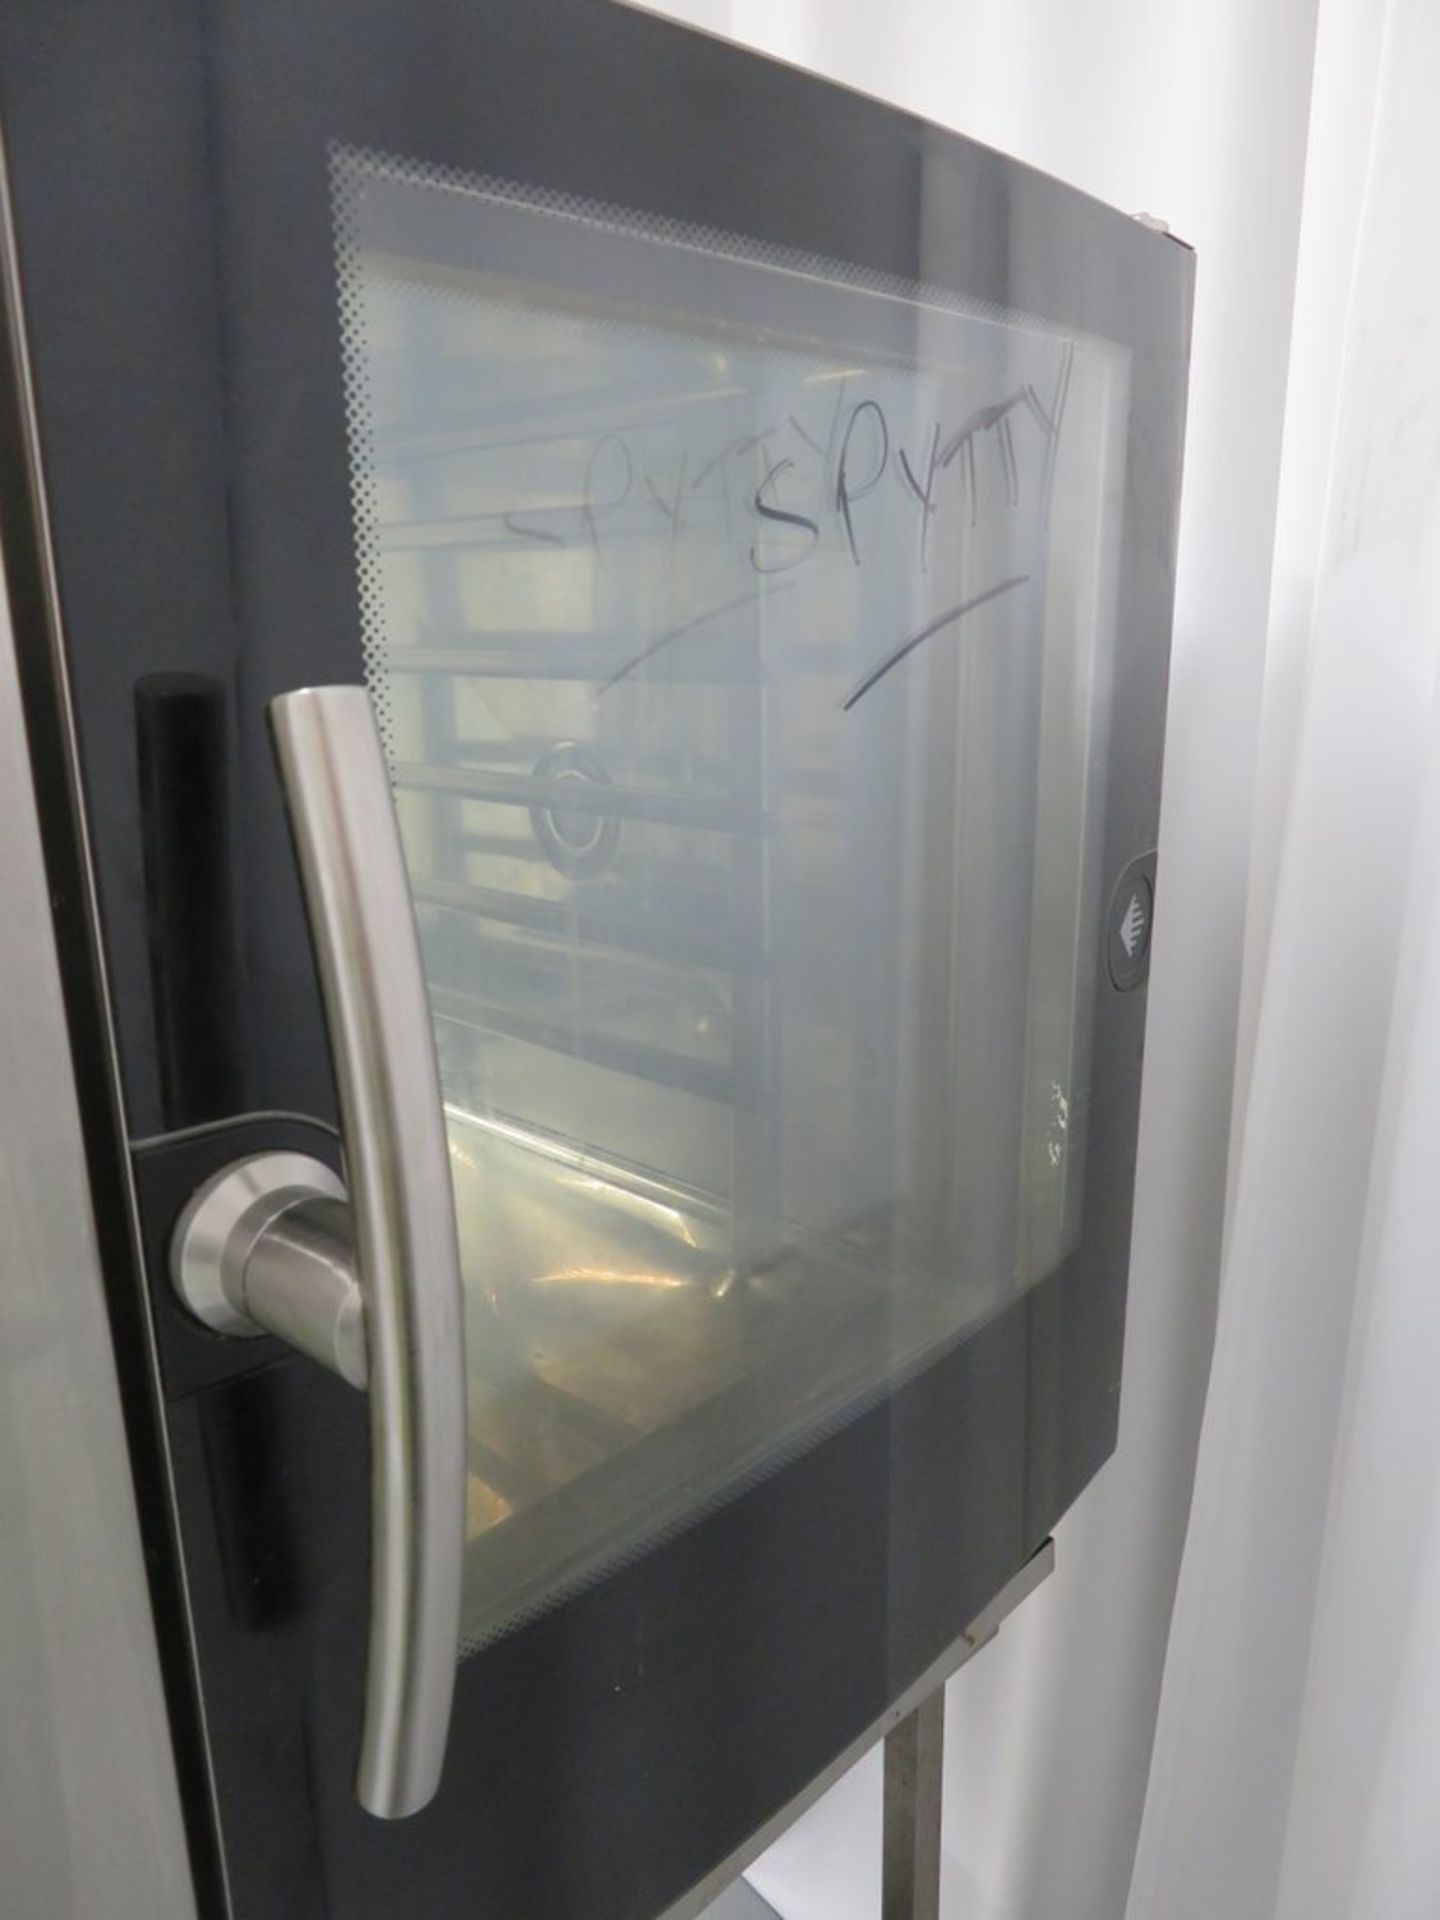 Houno B5 5 grid combi oven, 3 phase electric, dual opening front and back - Image 7 of 9